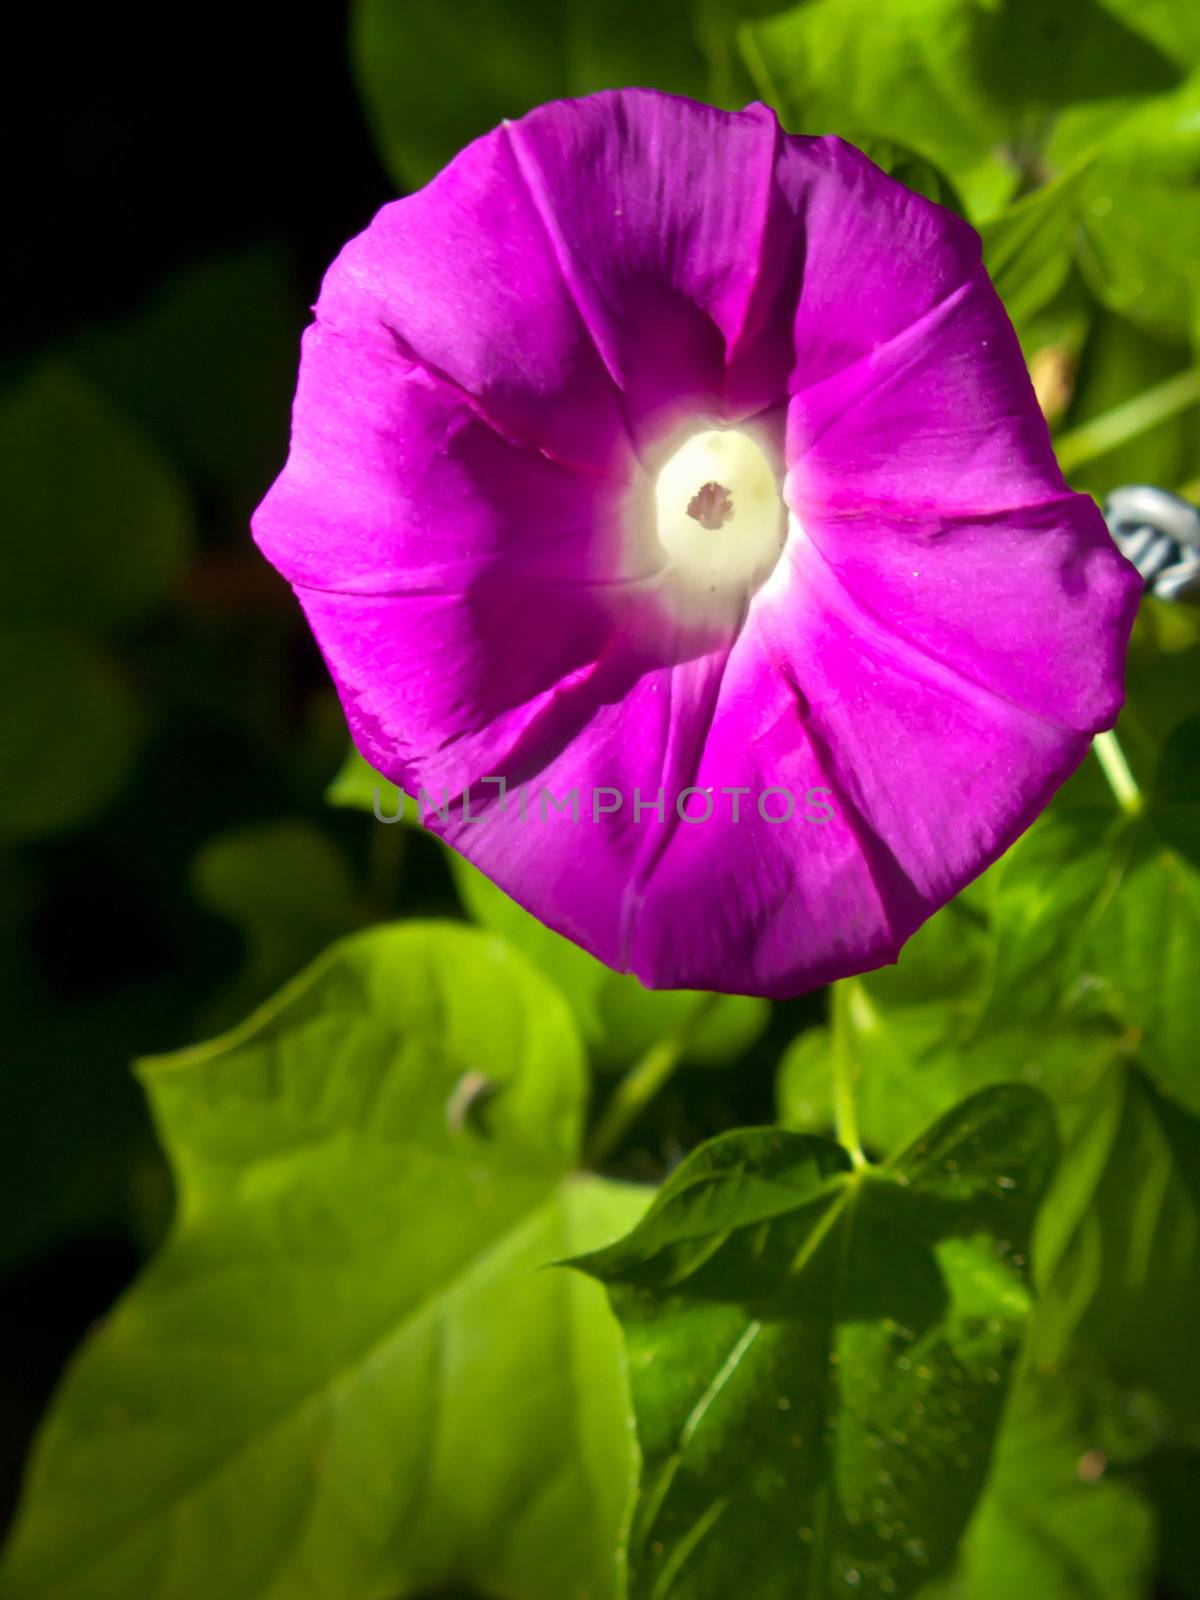 Beautiful pink flower of Morning glory(Ipomoea sp. Family Convolvulaceae), shallow depth of field focus on pollen.